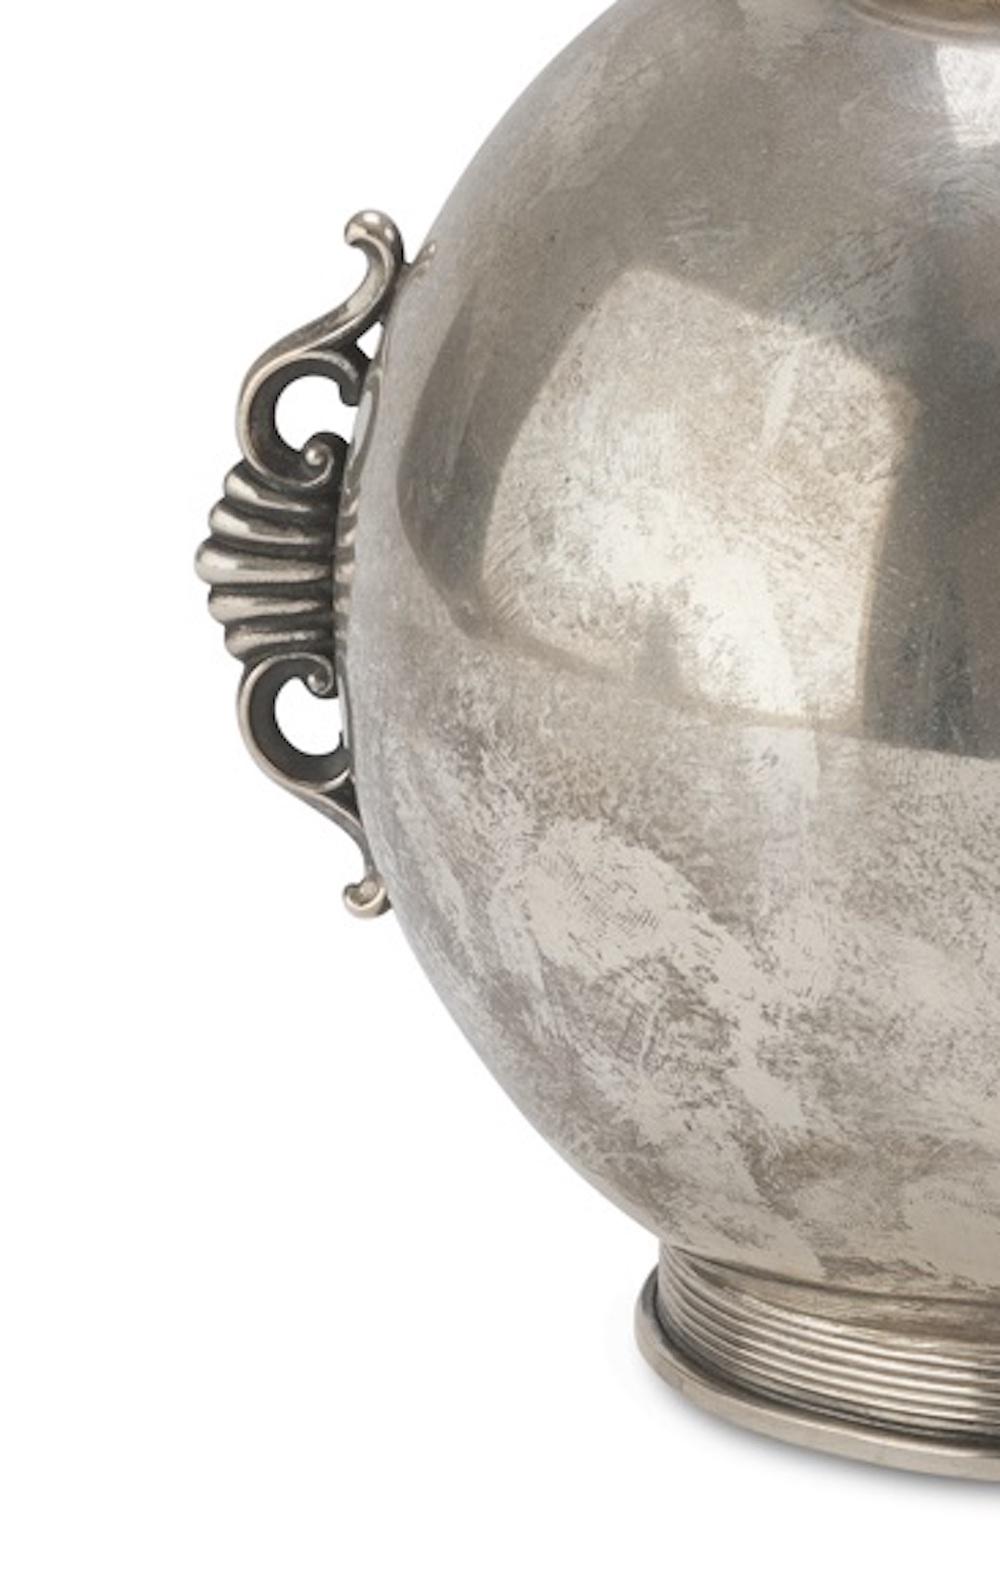 This silver ball jar is an original decorative object realized between the 1944 and the 1968.

Made in Italy. Realized by Ricci & Co.

Titled 800/1000. Total weight: gr. 332.

Mint conditions.

Very beautiful Italian object realized in